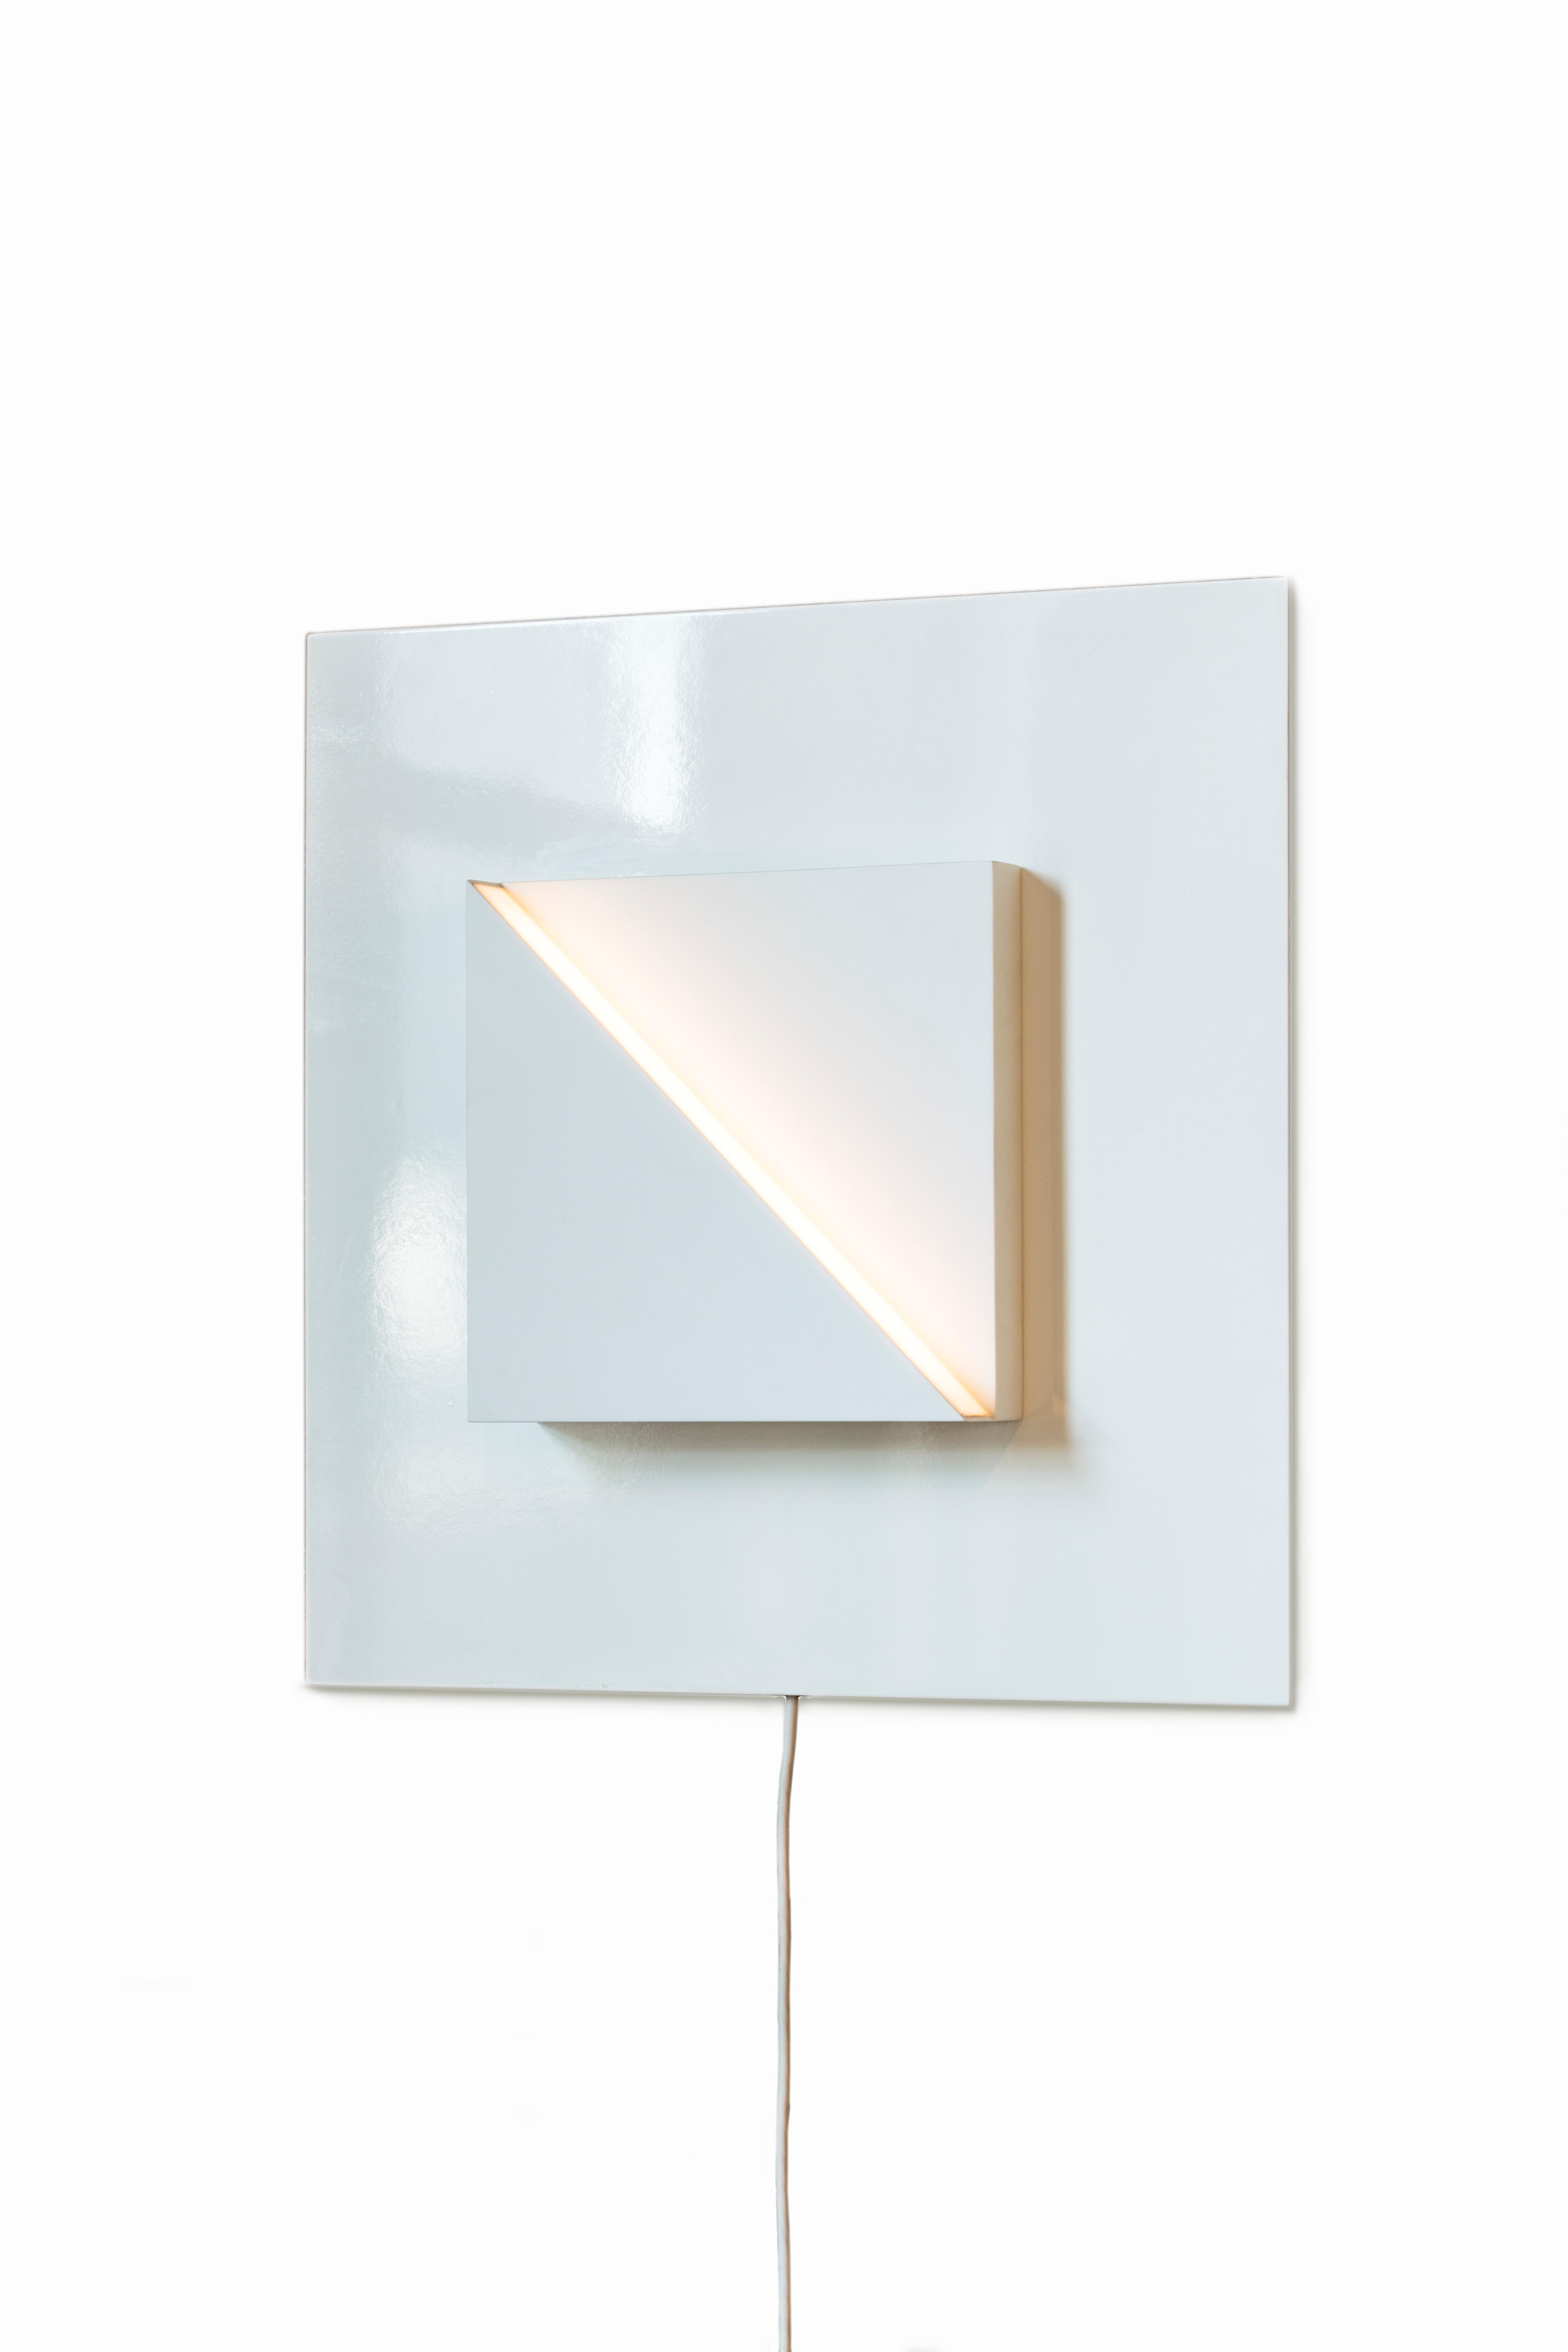 Part of the Cycladic Series, exploring the power of architecture brought to small scale. The framed square sconce illuminates the purity, symbolism and intimate power of elemental geometric forms expressed in both nature and our manmade world. A